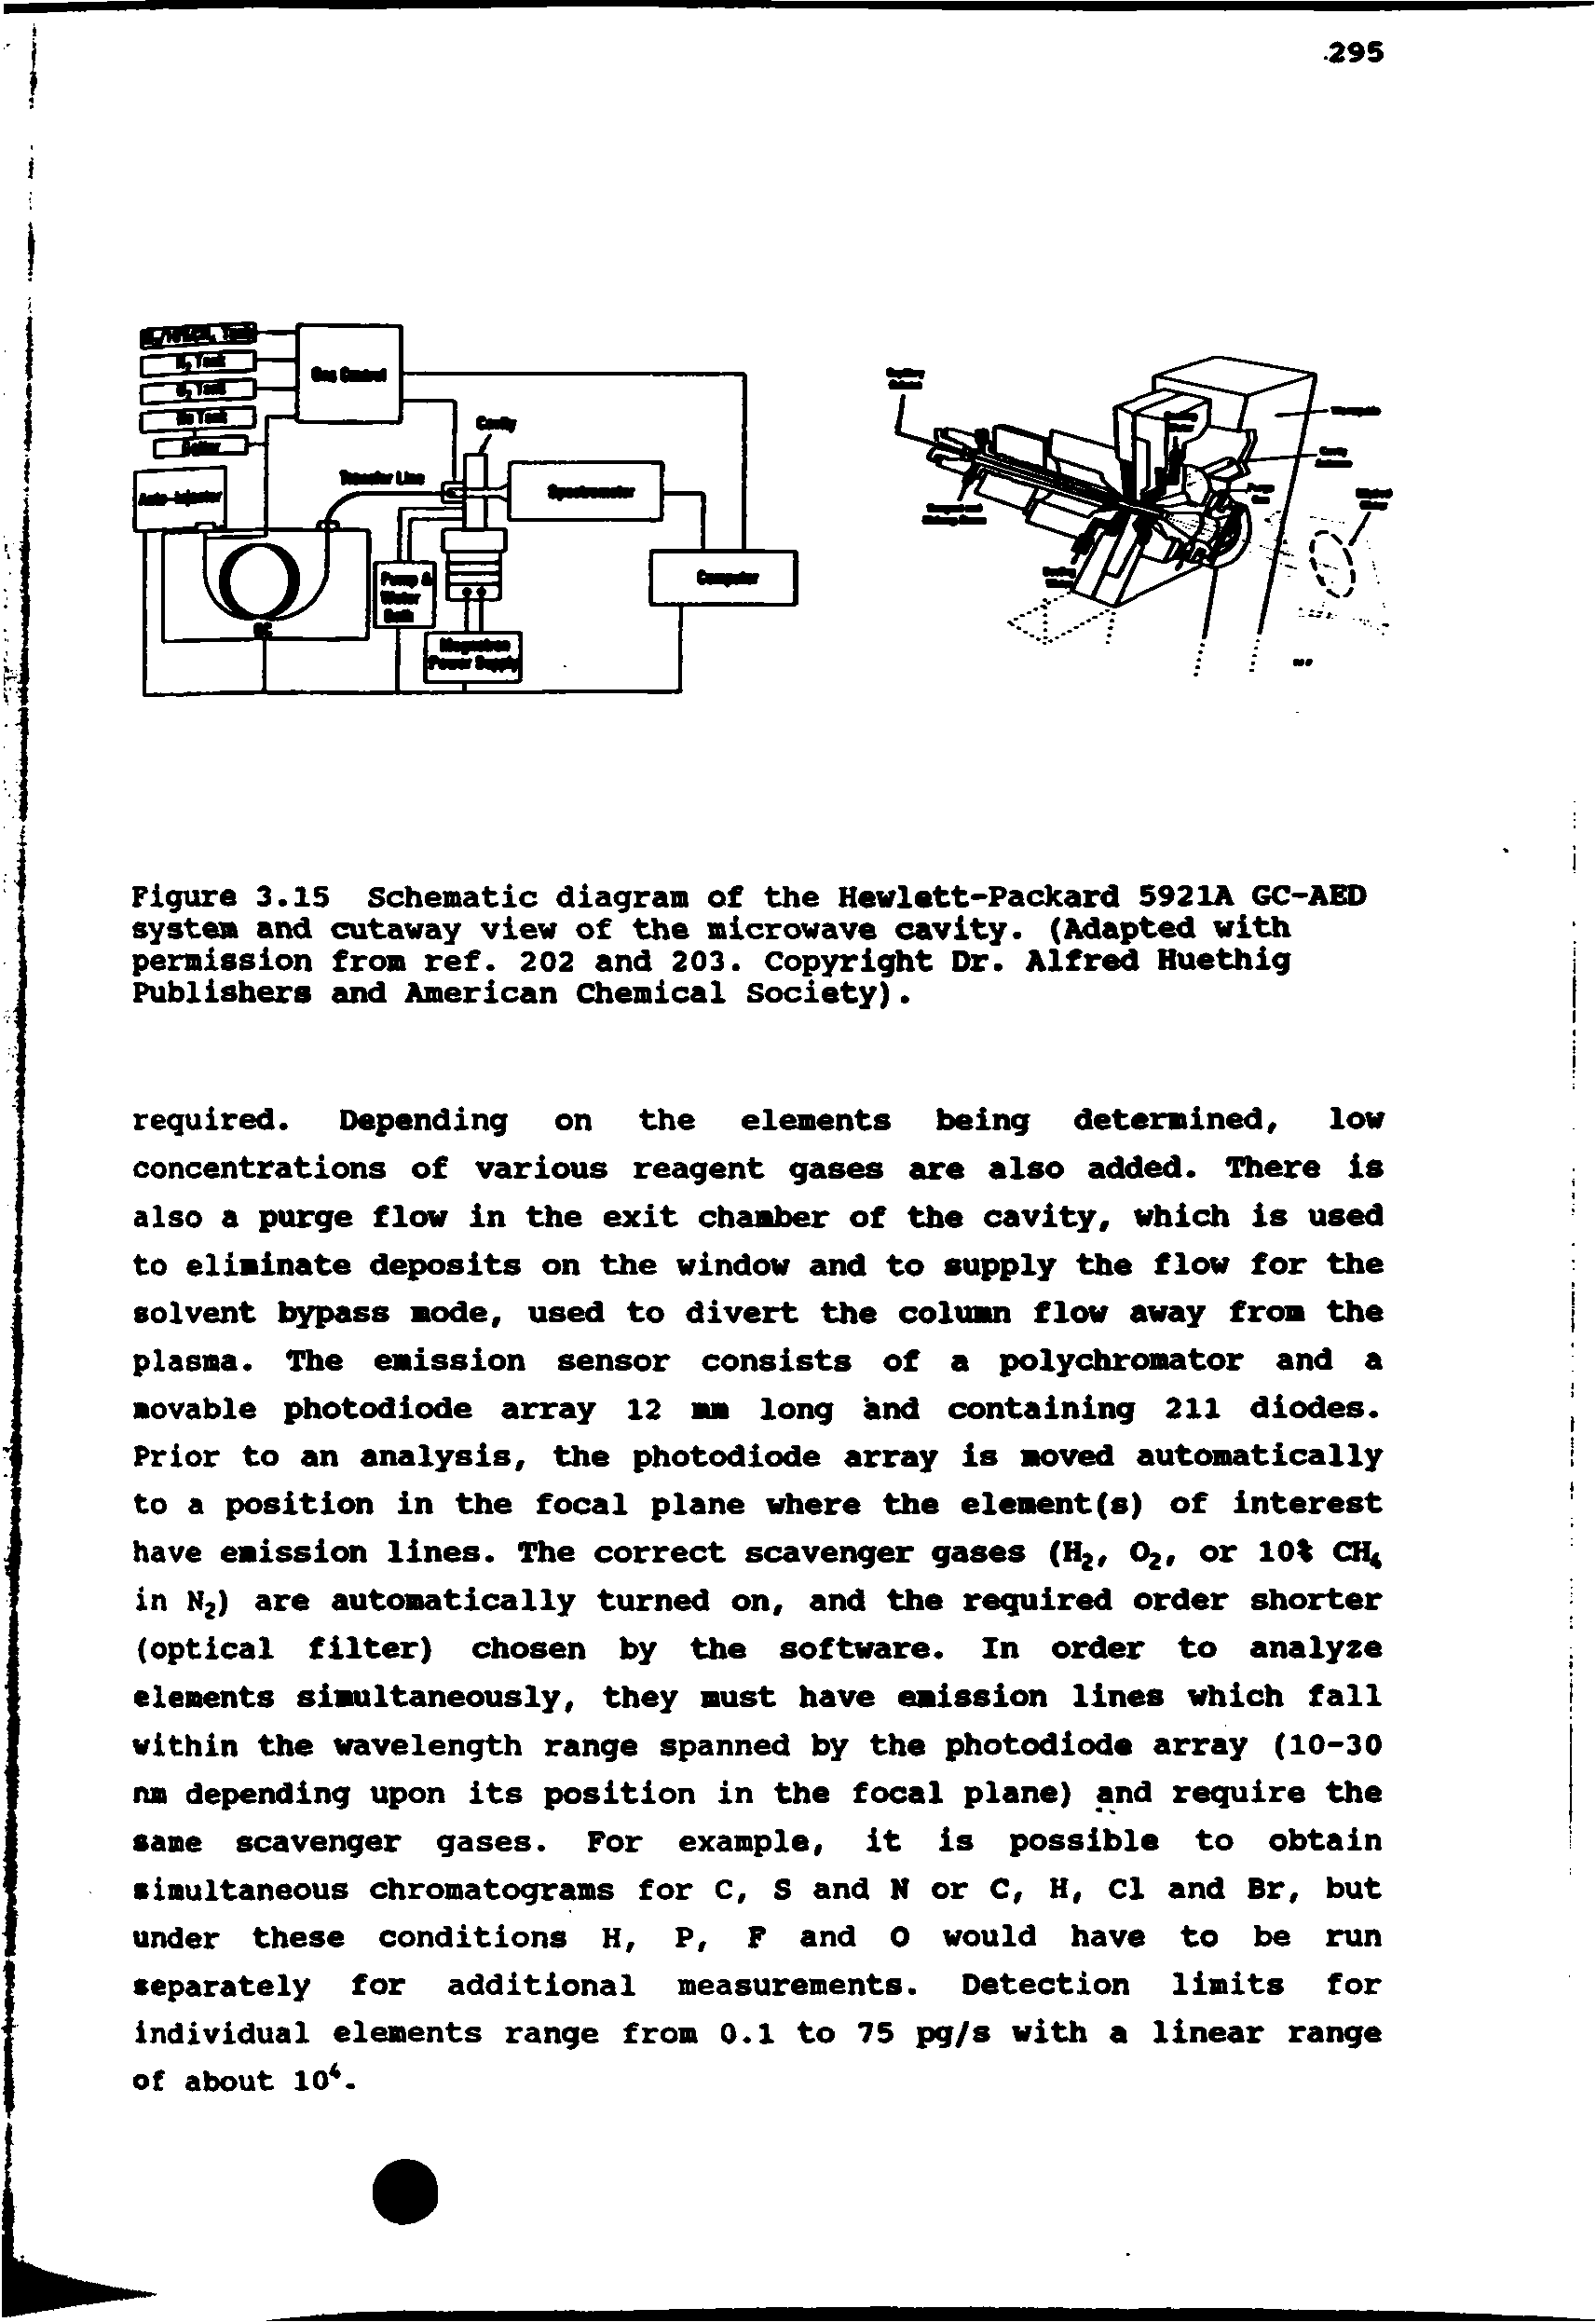 Figure 3.15 Schematic diagram of the Hewlett-Packard 5921A GC-AED system and cutaway view of the microwave cavity. (Adapted with permission from ref. 202 and 203. Copyright Dr. Alfred Huethig Publishers and American Chemical Society).